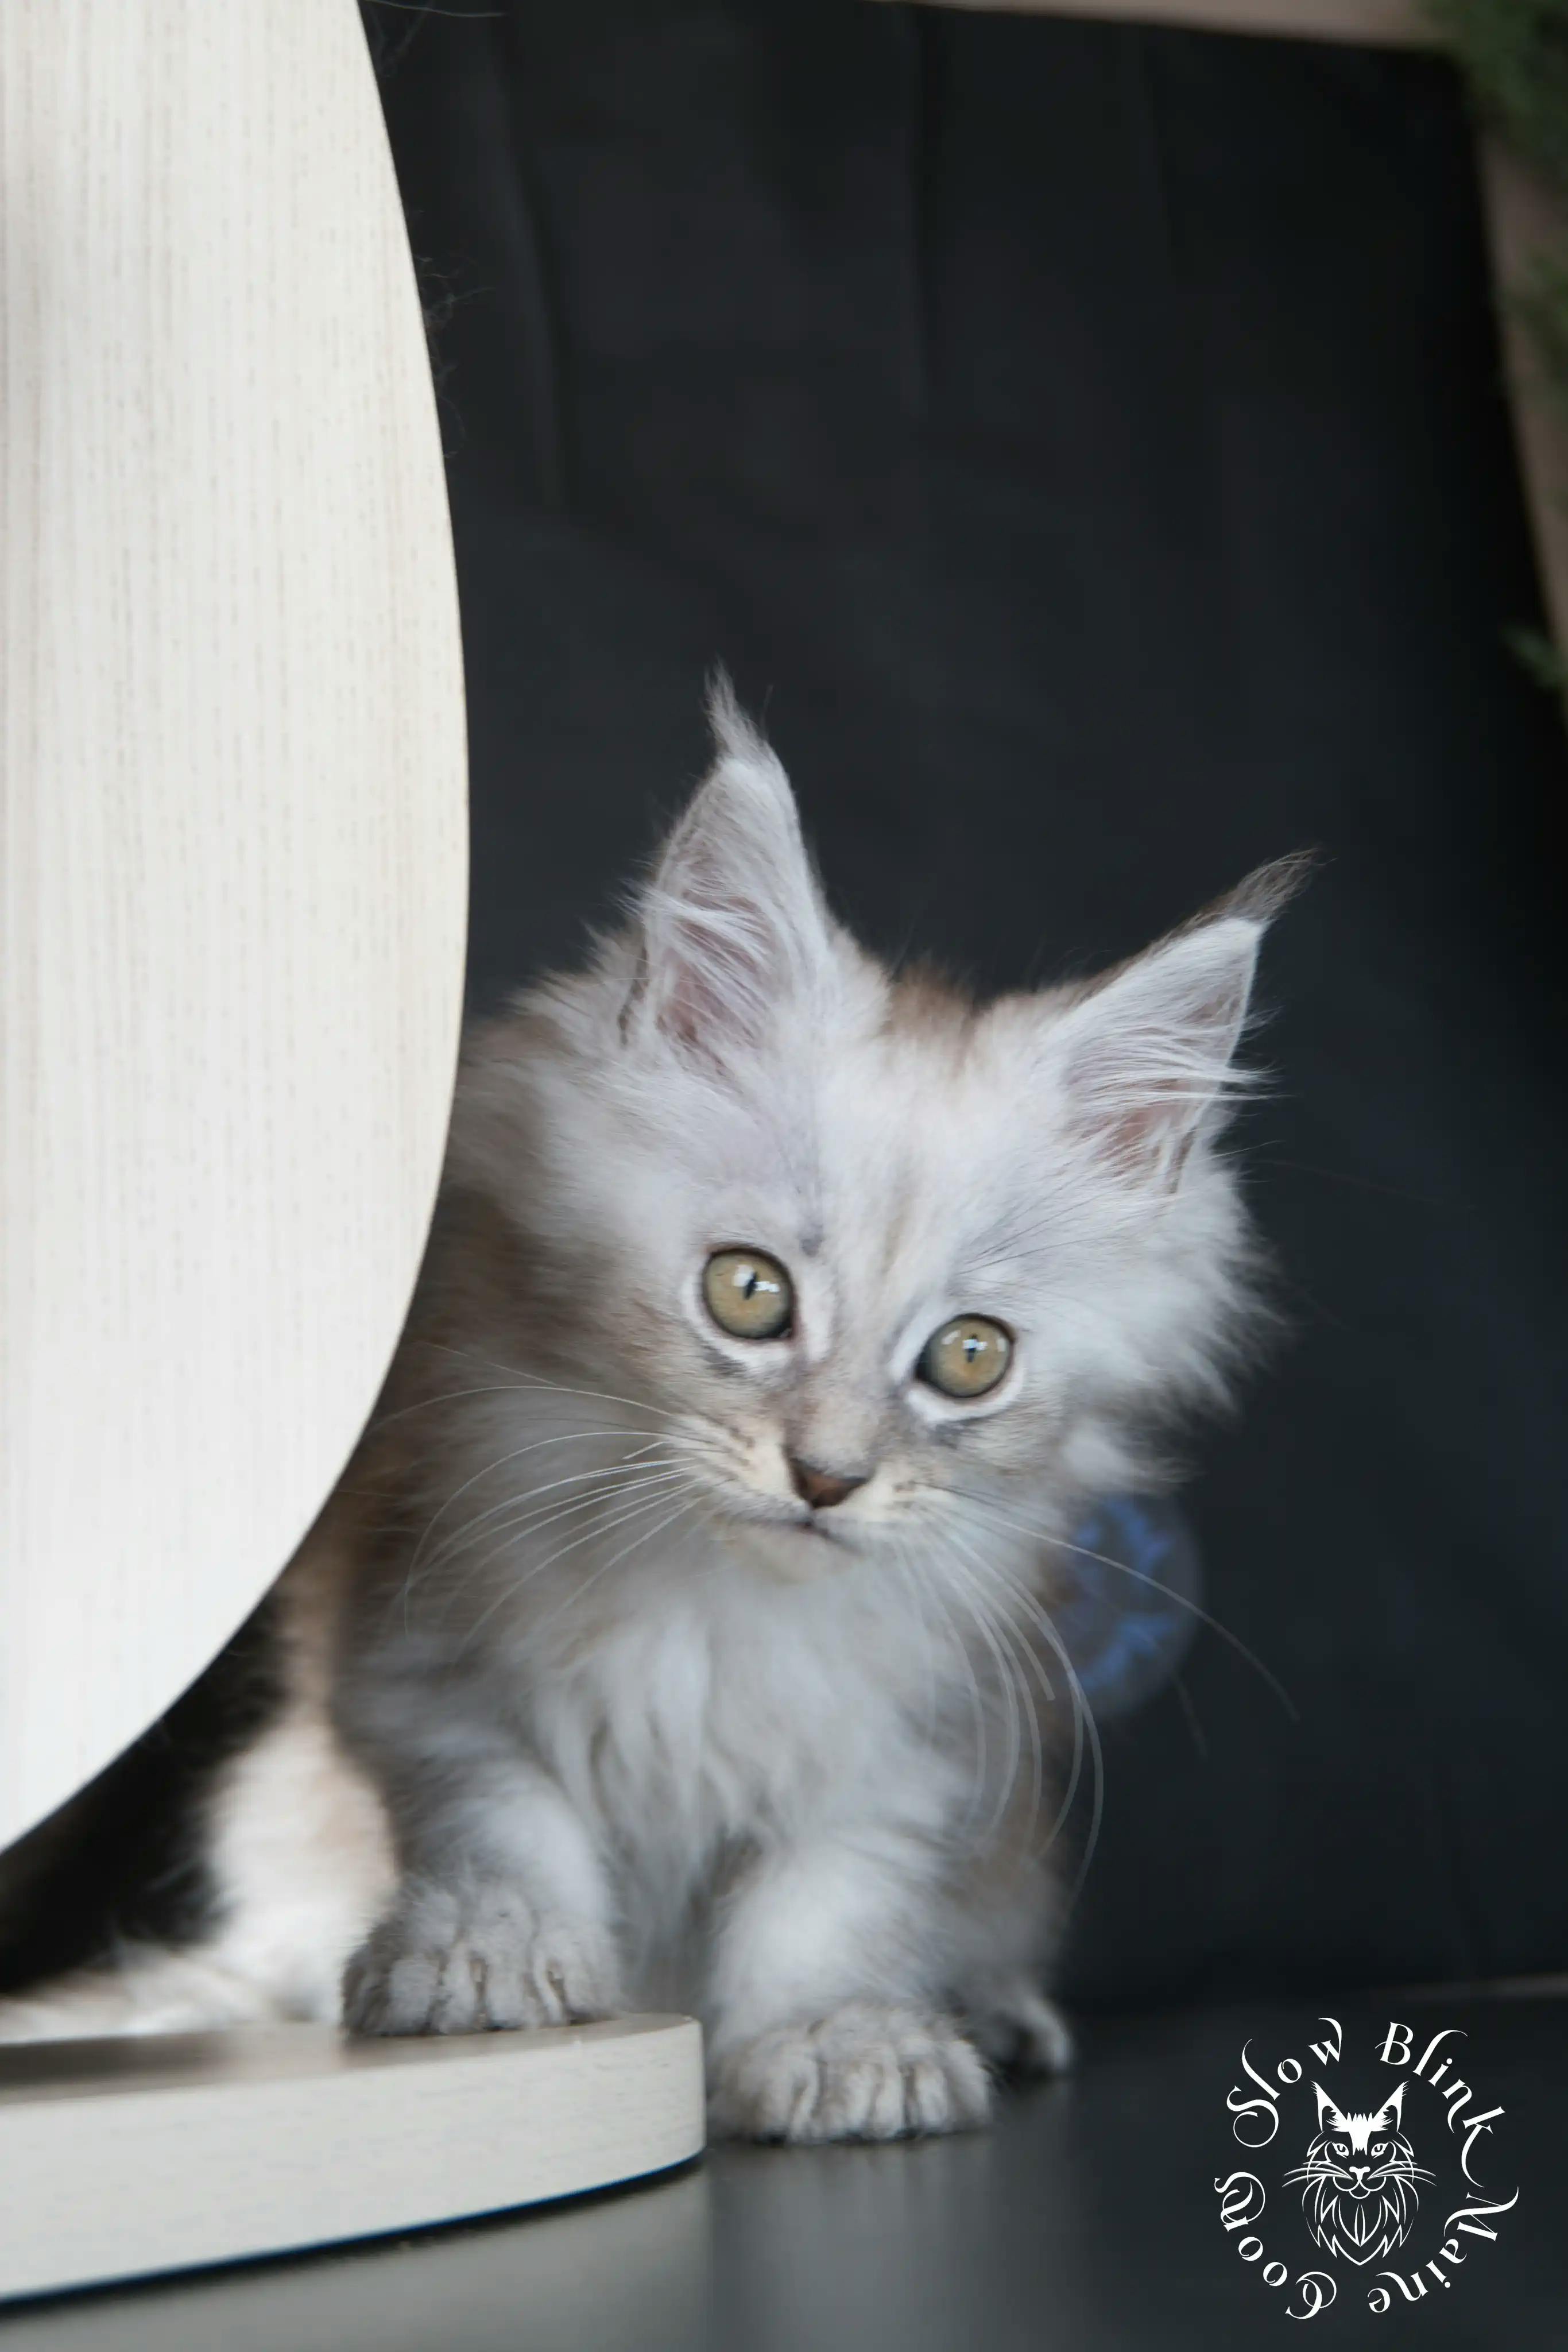 High Silver Maine Coon Kittens > black silver tabby maine coon kitten | ems code ns 22 23 24 25 | slowblinkmainecoons | 603